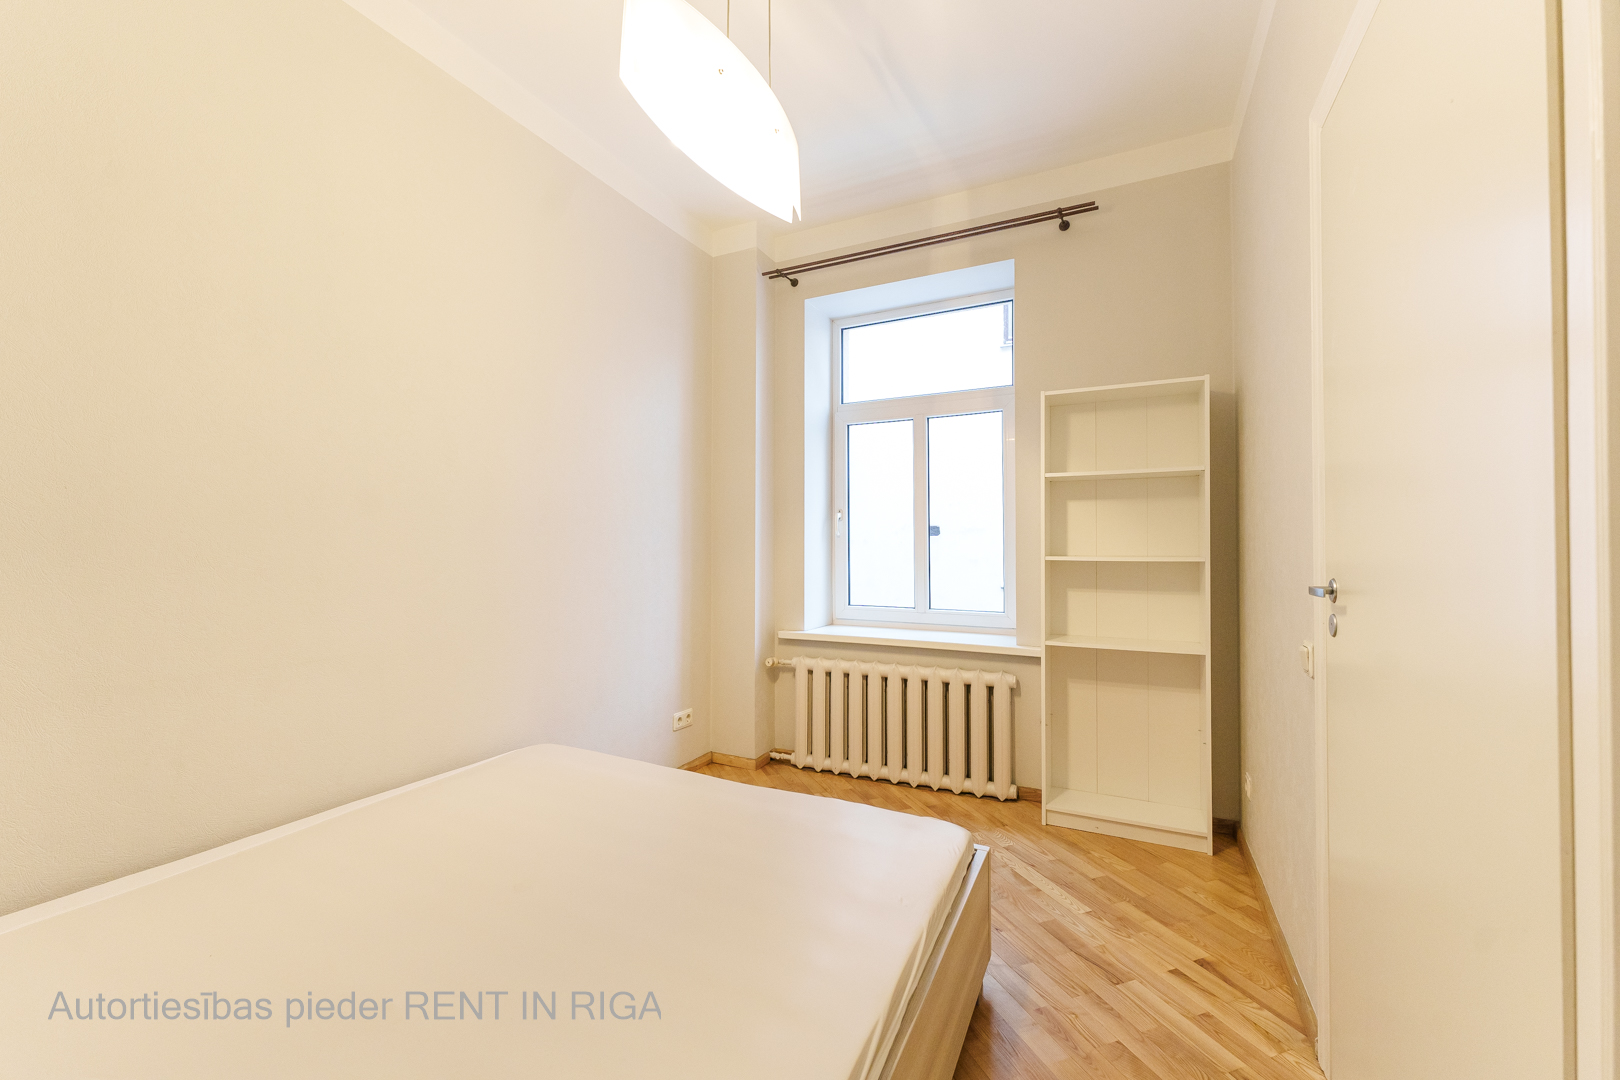 Apartment for rent, Stabu street 30 - Image 1